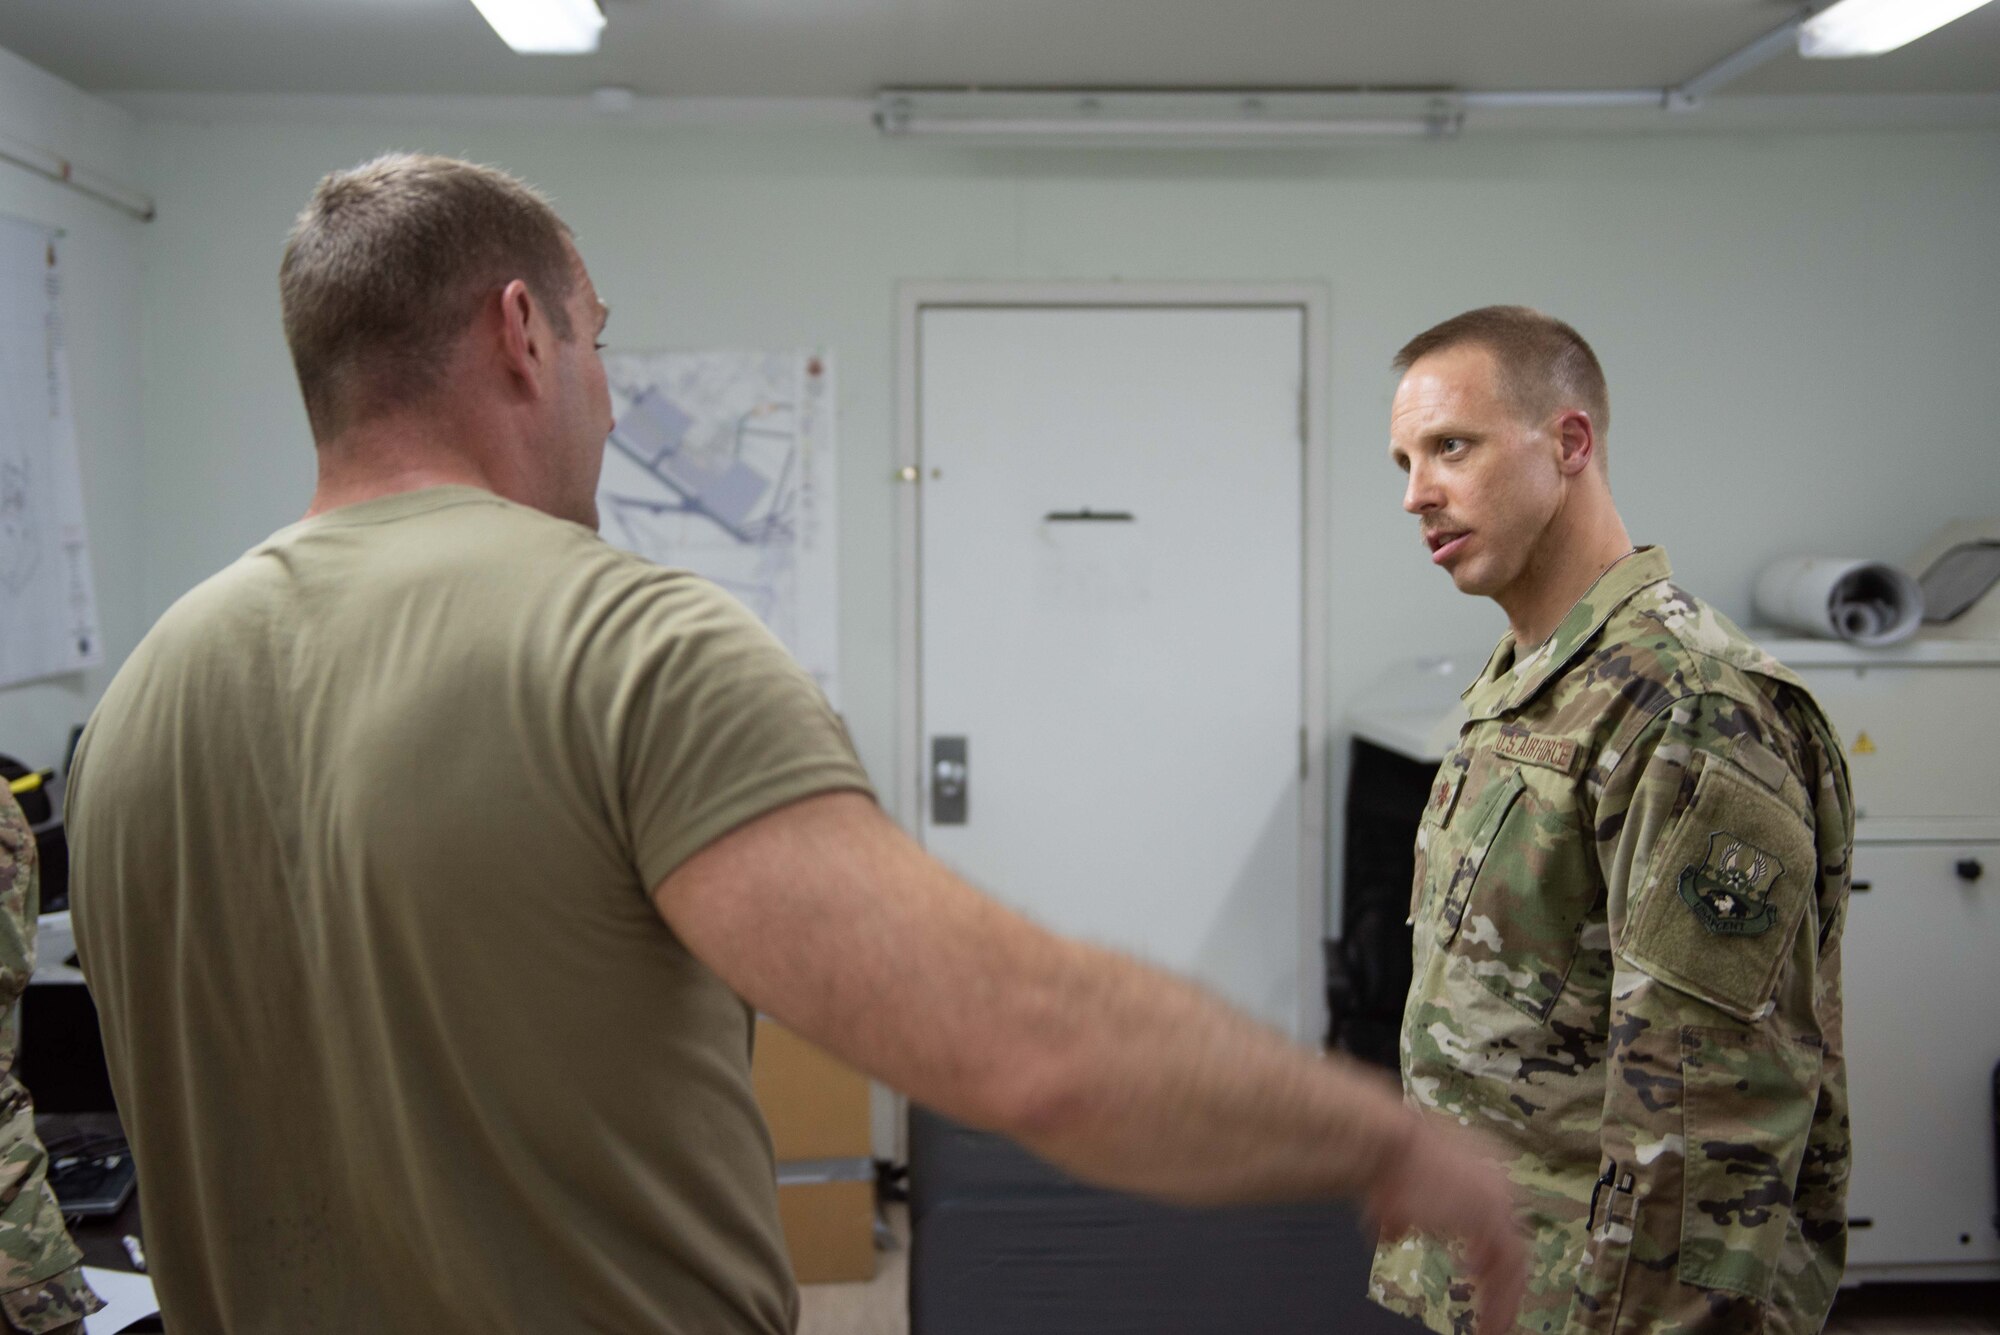 Maj. Adam Frost, 380th Expeditionary Medical Group physical therapist, listens to a patient about his back pain May 17, 2019 at Al Dhafra Air Base, United Arab Emirates. The base physical therapy team went to the maintenance and operations side of the base to visit multiple maintainers on-site. (U.S. Air Force photo by Staff Sgt. Chris Thornbury)